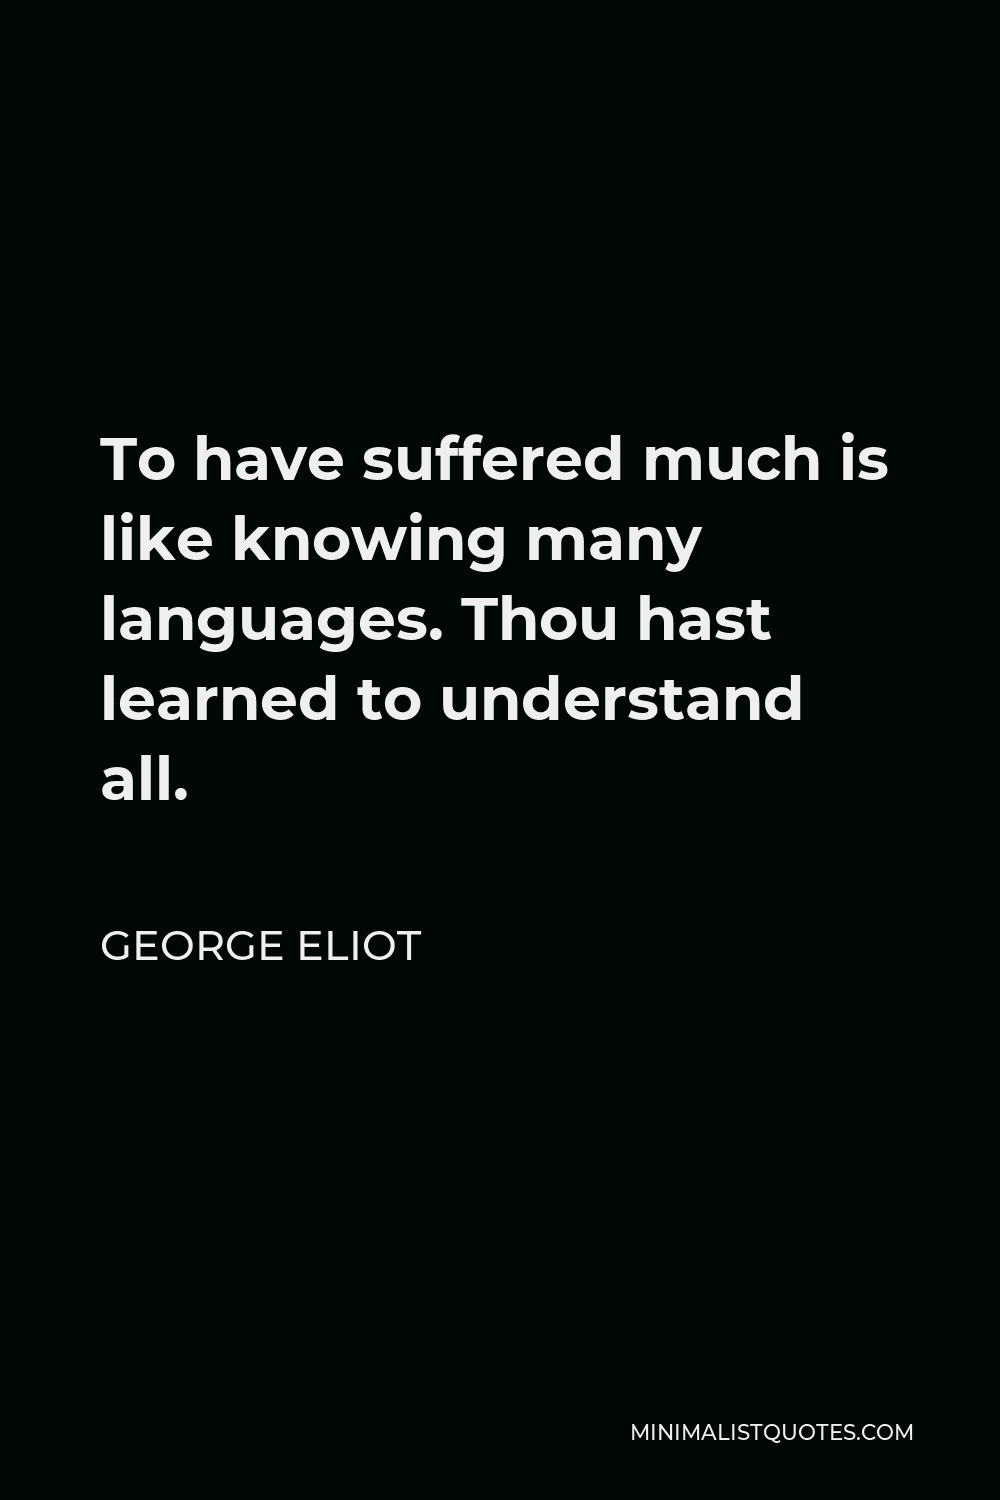 George Eliot Quote - To have suffered much is like knowing many languages. Thou hast learned to understand all.